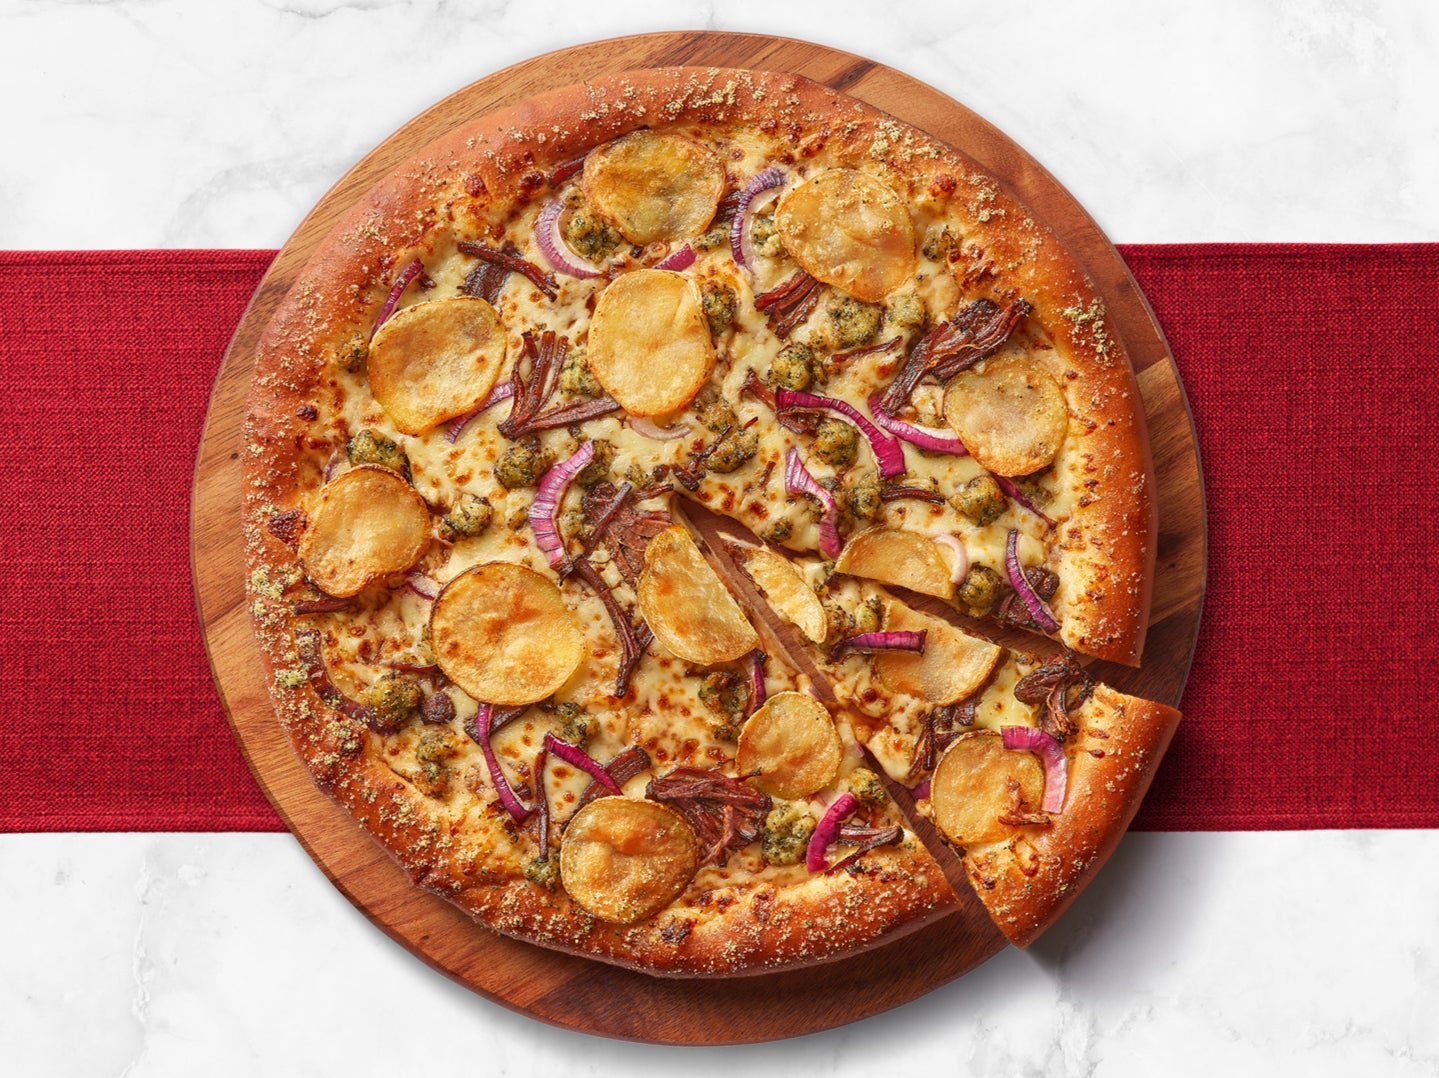 Pizza Hut’s new roast dinner pizza features roast beef, thinly sliced roast potatoes, stuffing and onions on a red wine gravy base